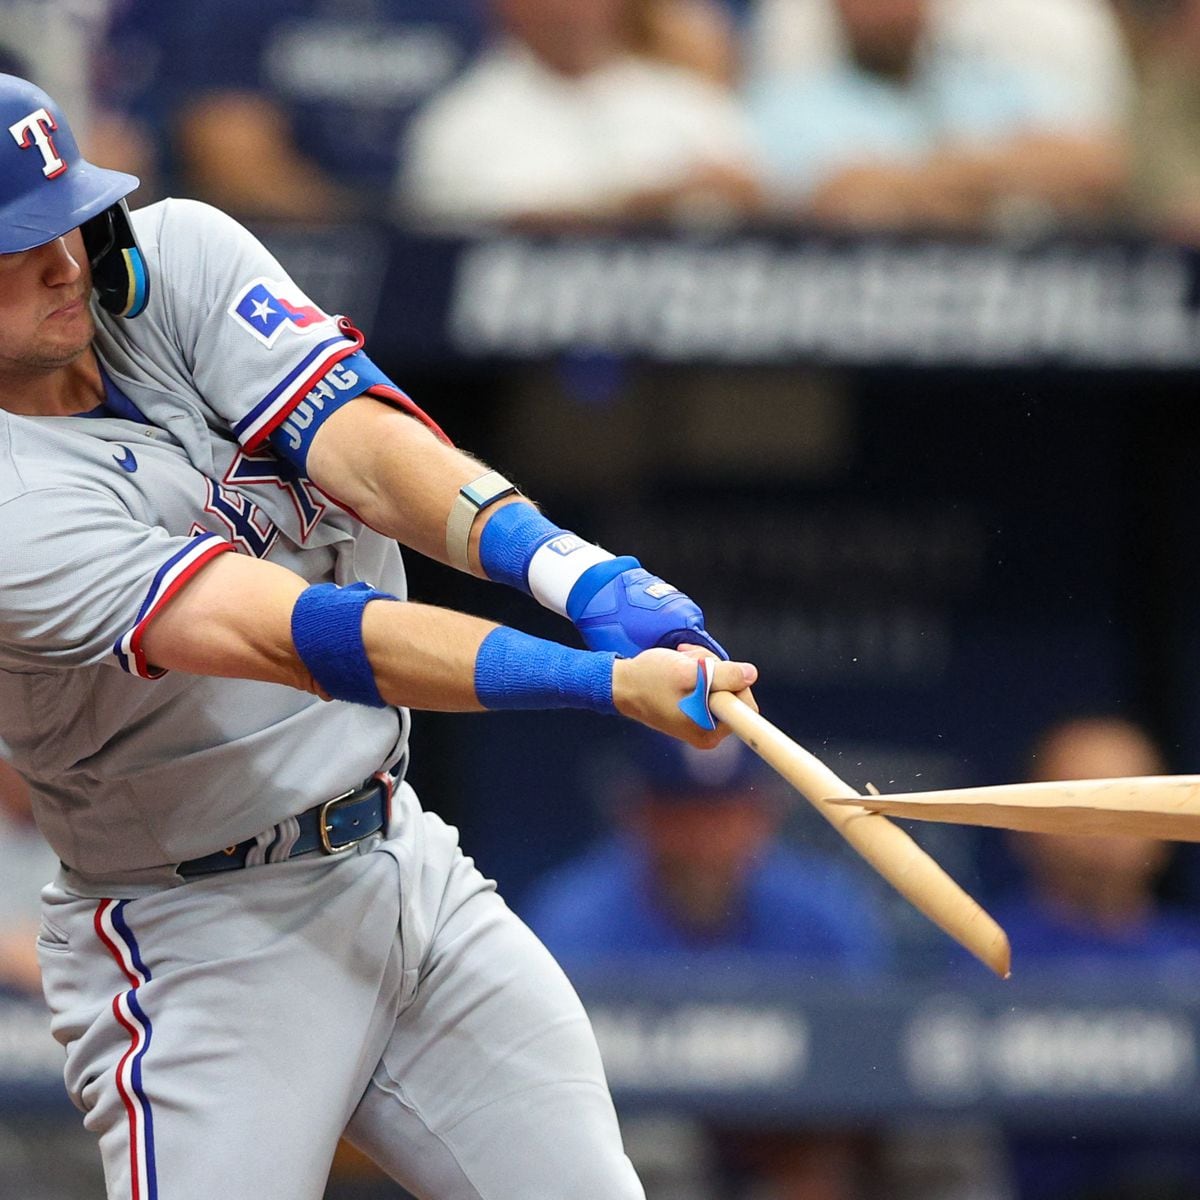 Texas Rangers suddenly on top of AL West after finishing crucial